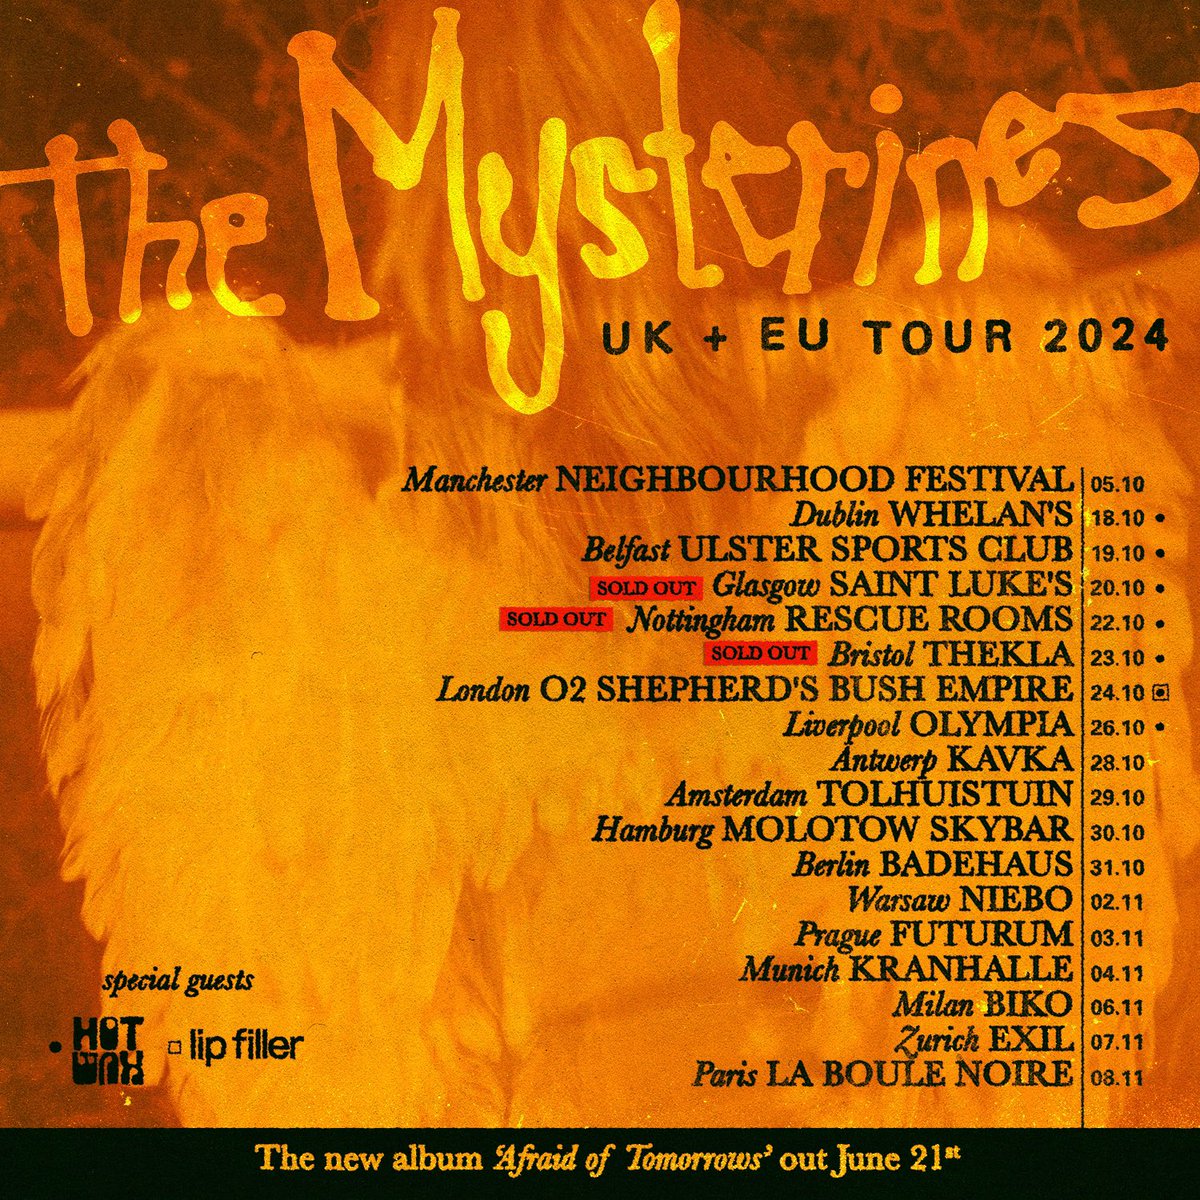 We are happy to announce that @hotwaxbandd and @LipFillertv are going to join us on our UK tour 2024 ! Get your tickets here: themysterines.com 🏴󠁧󠁢󠁥󠁮󠁧󠁿🏴󠁧󠁢󠁳󠁣󠁴󠁿🇮🇪